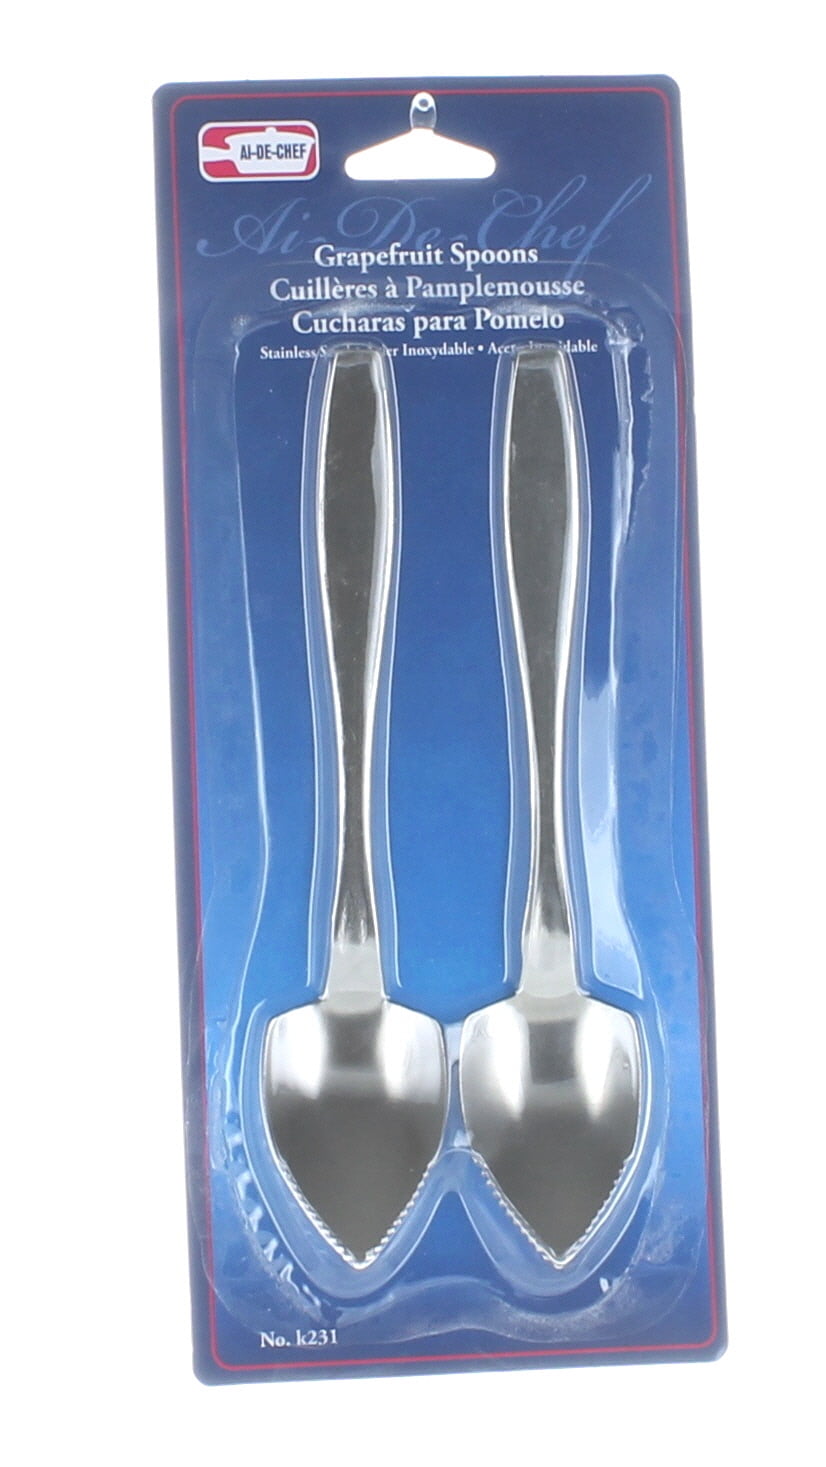 Blue 5 Pack Grapefruit Spoon High Grade Polished Stainless Steel Serrated Edge Design 